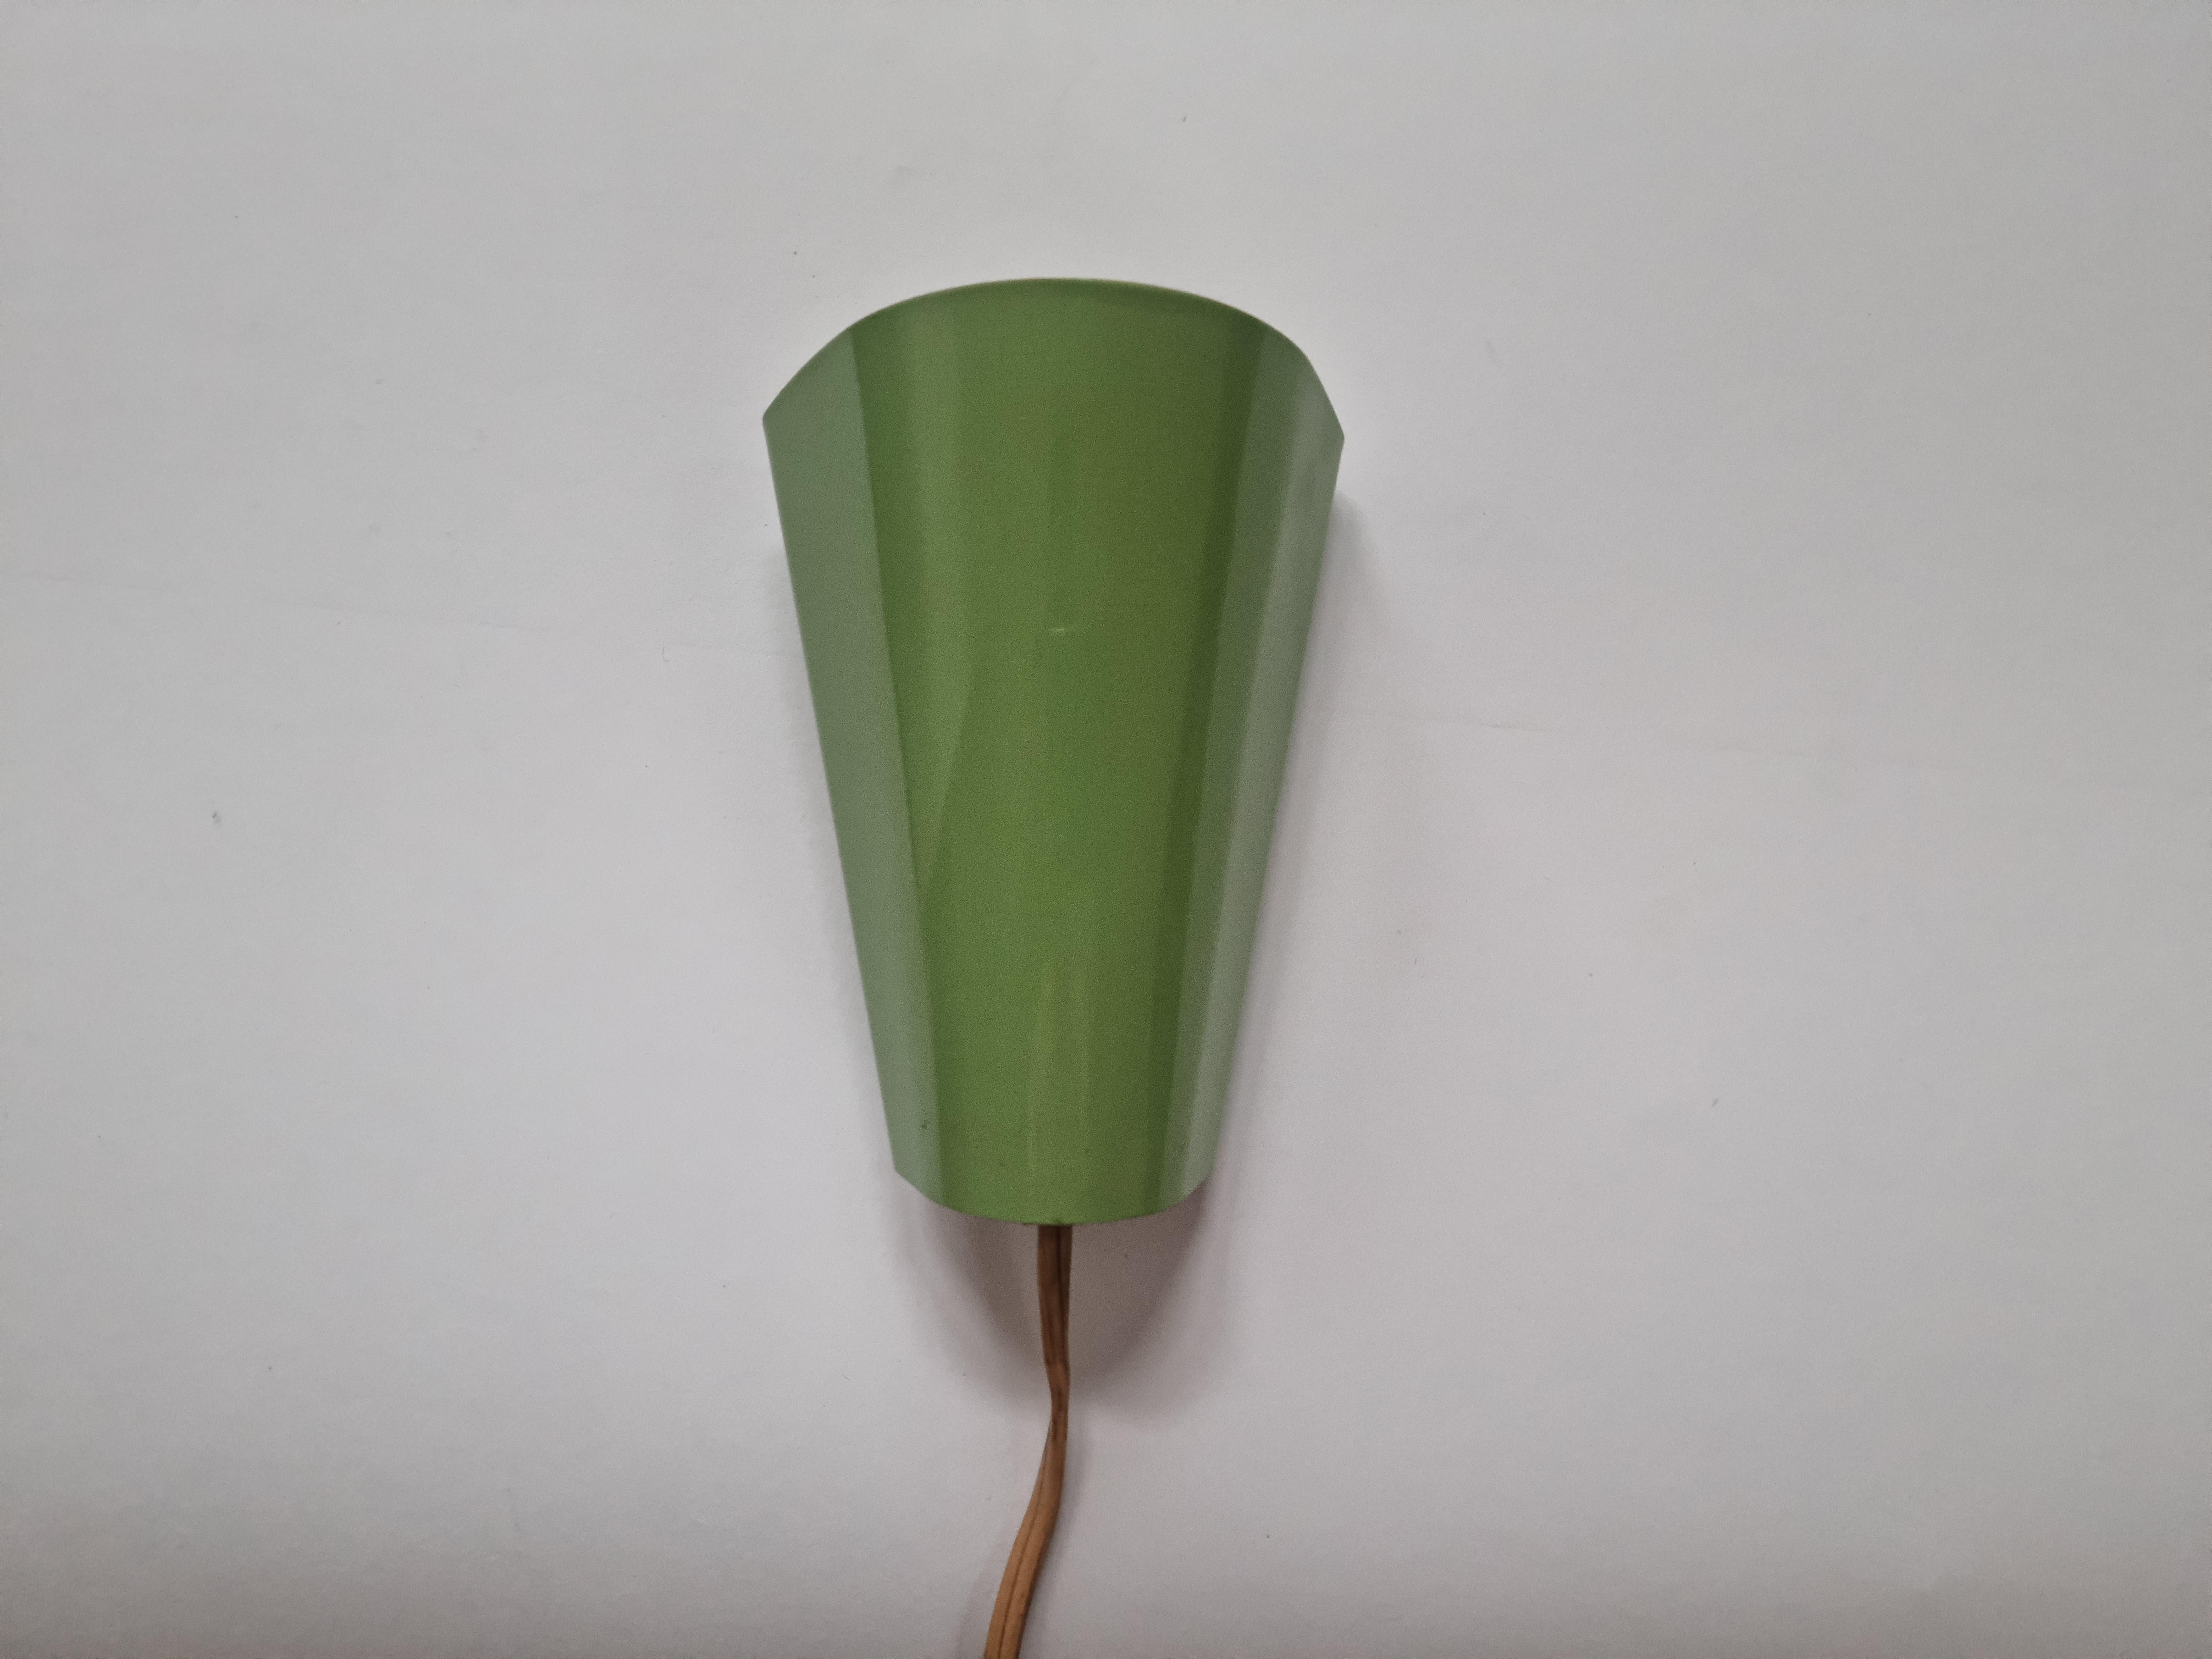 Midcentury Rare Wall Lamp Lidokov, Designed by Josef Hurka, 1960s For Sale 9